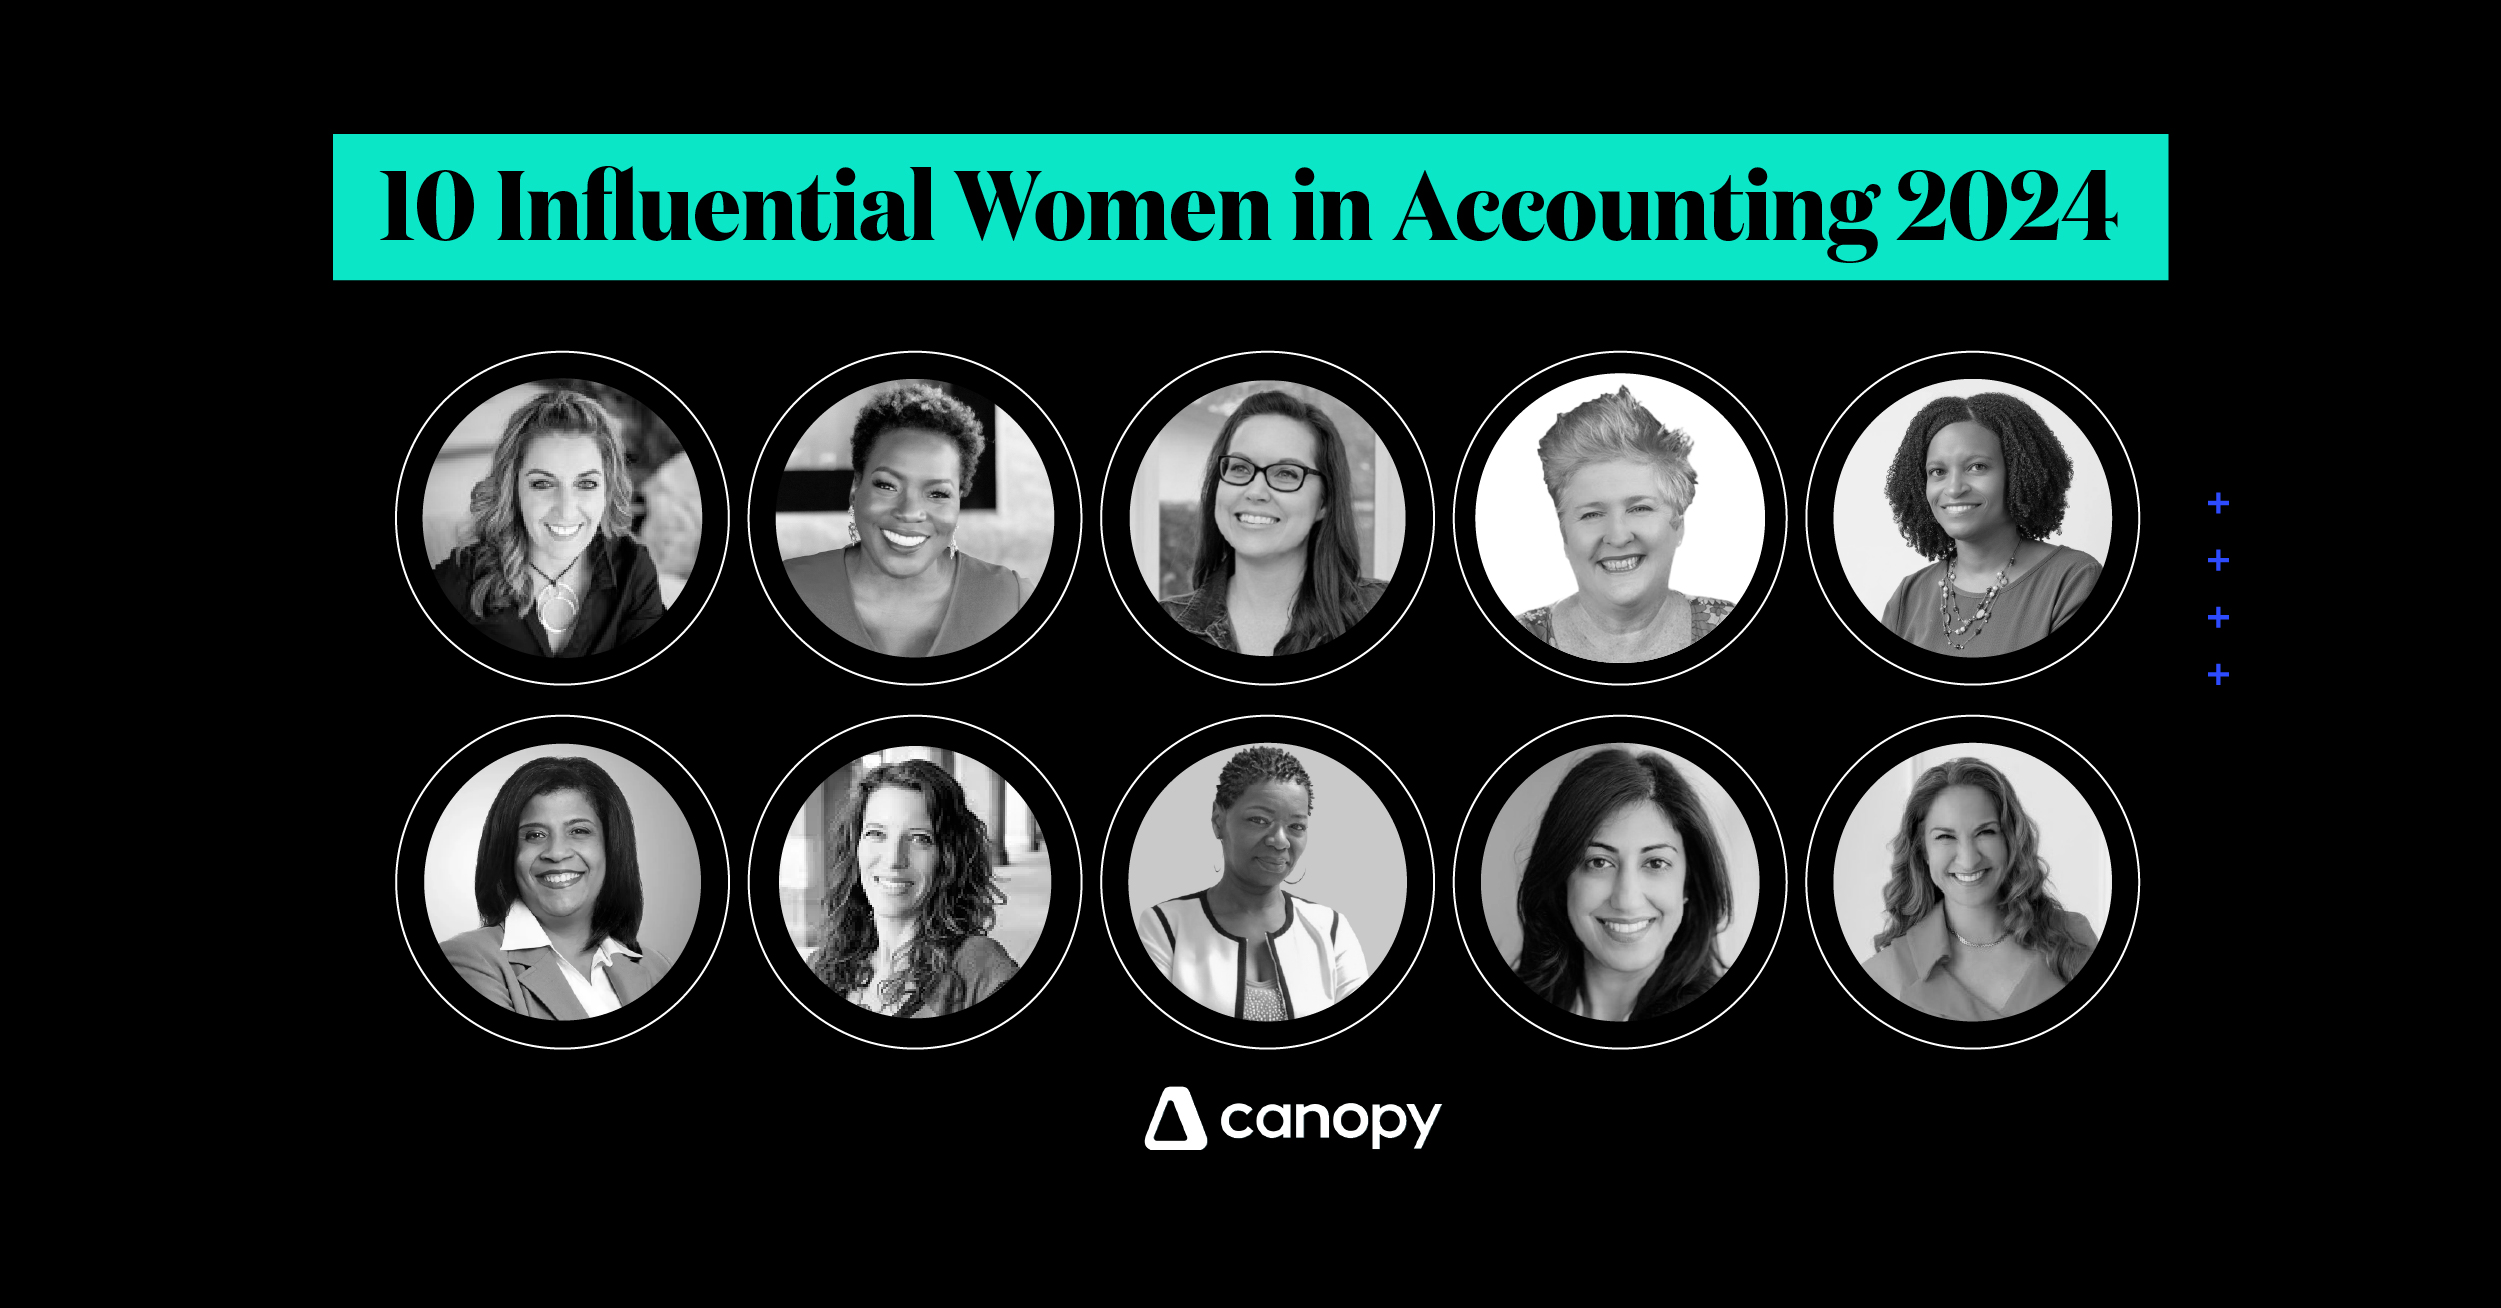 10 Influential Women in Accounting 2024